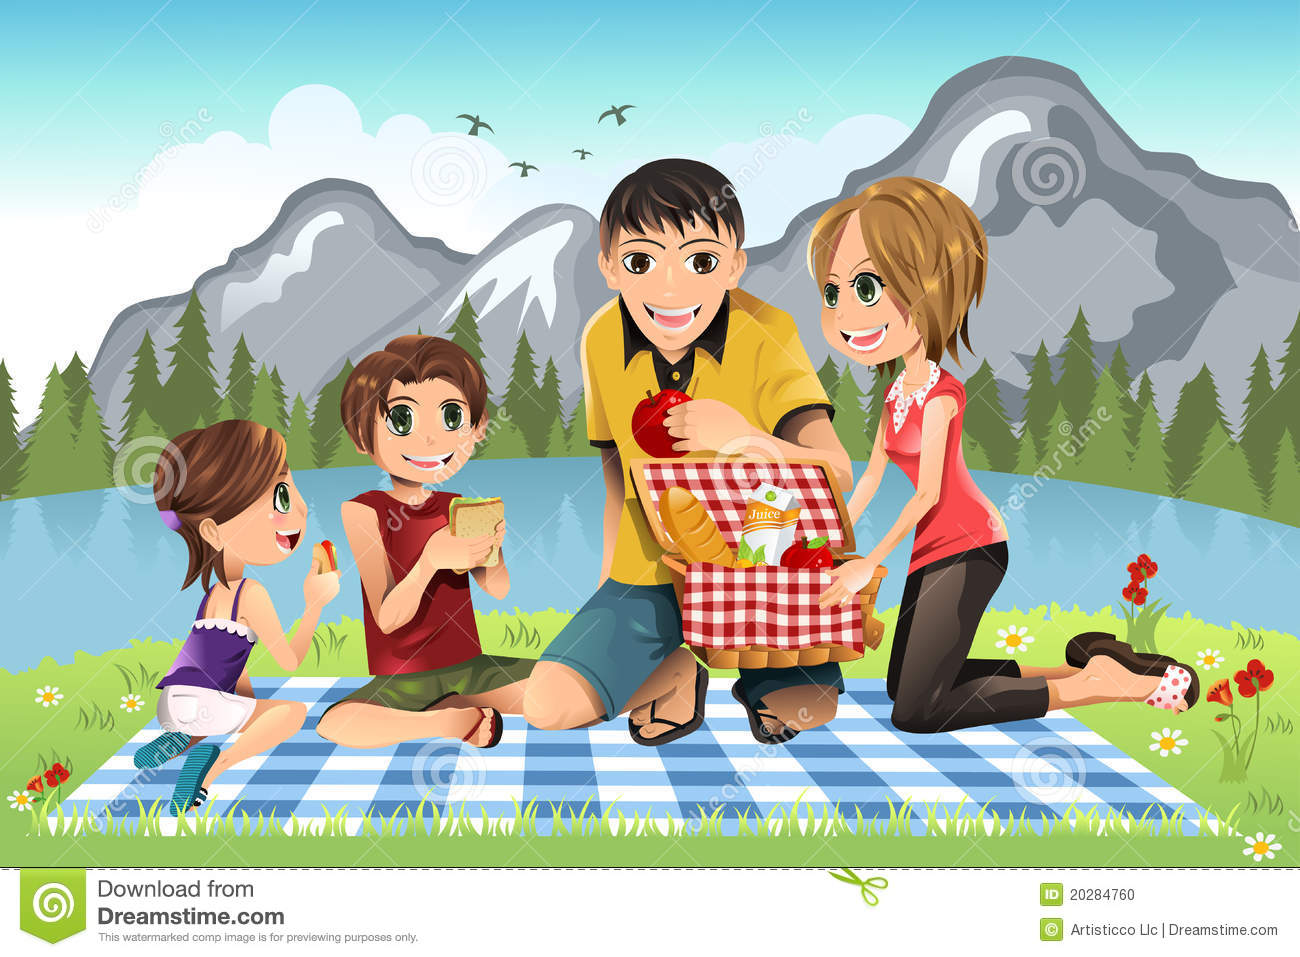 Illustration Of A Family Having A Picnic In A Park